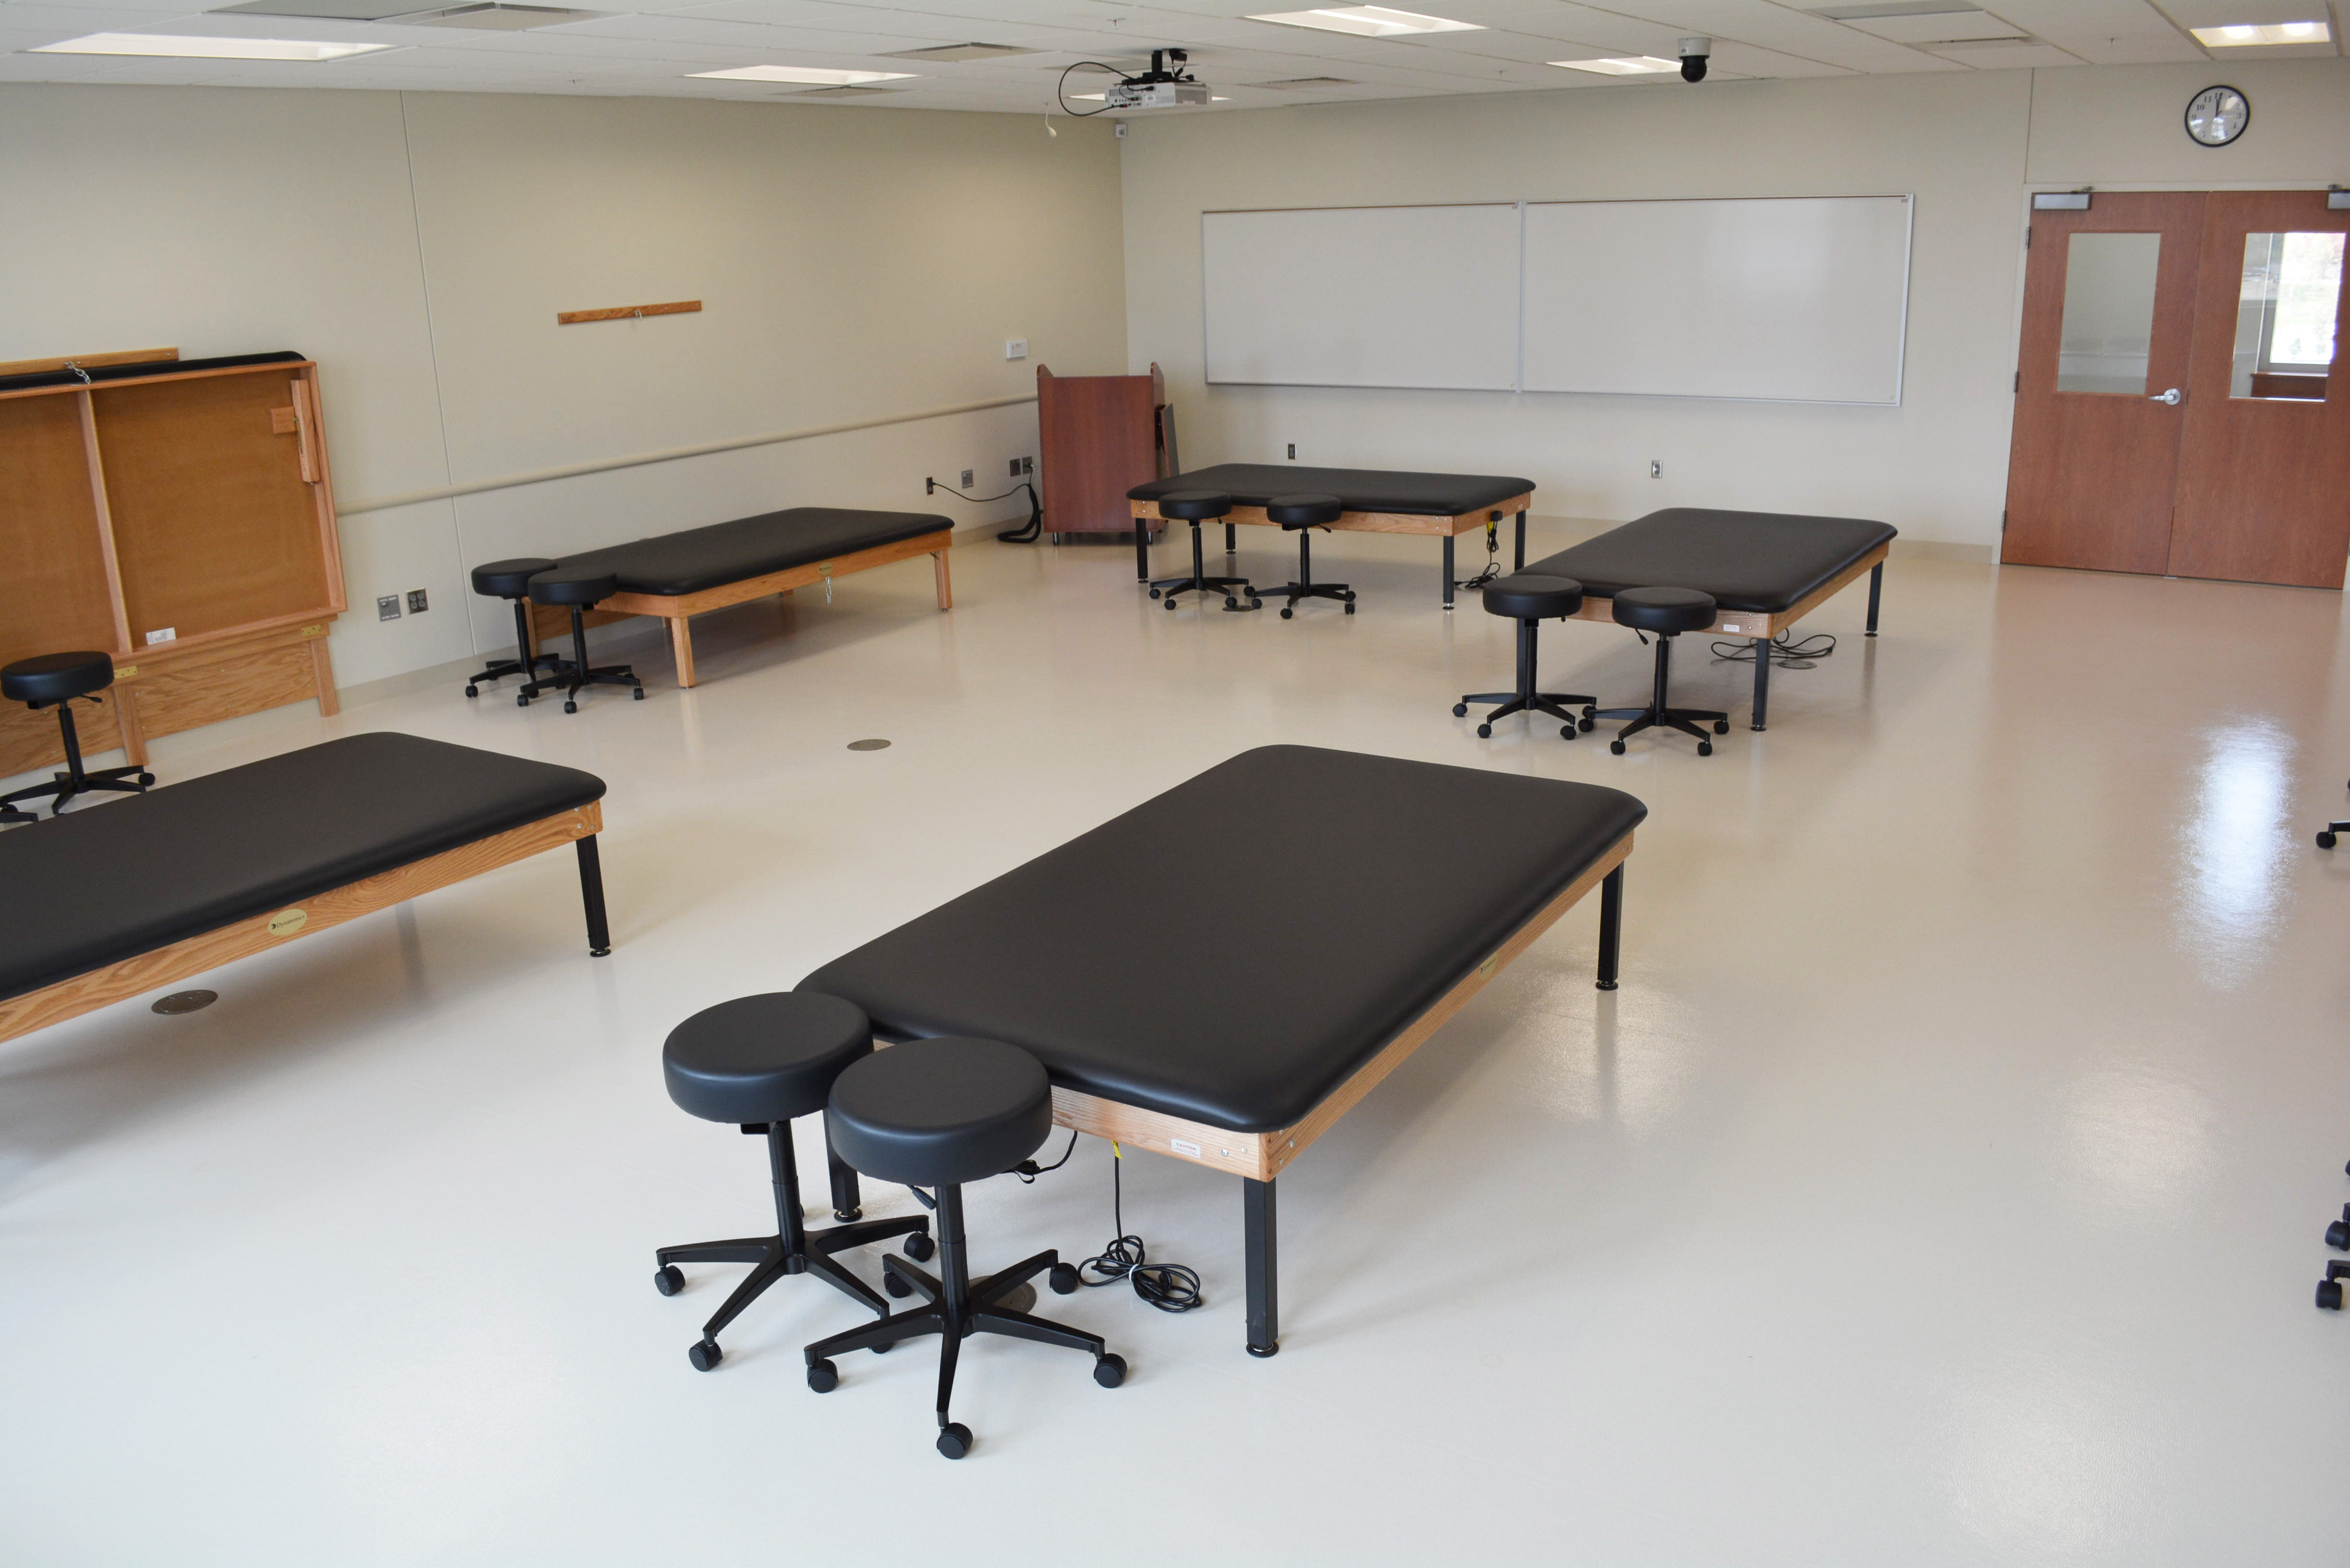 Physical Therapy Teaching Lab B